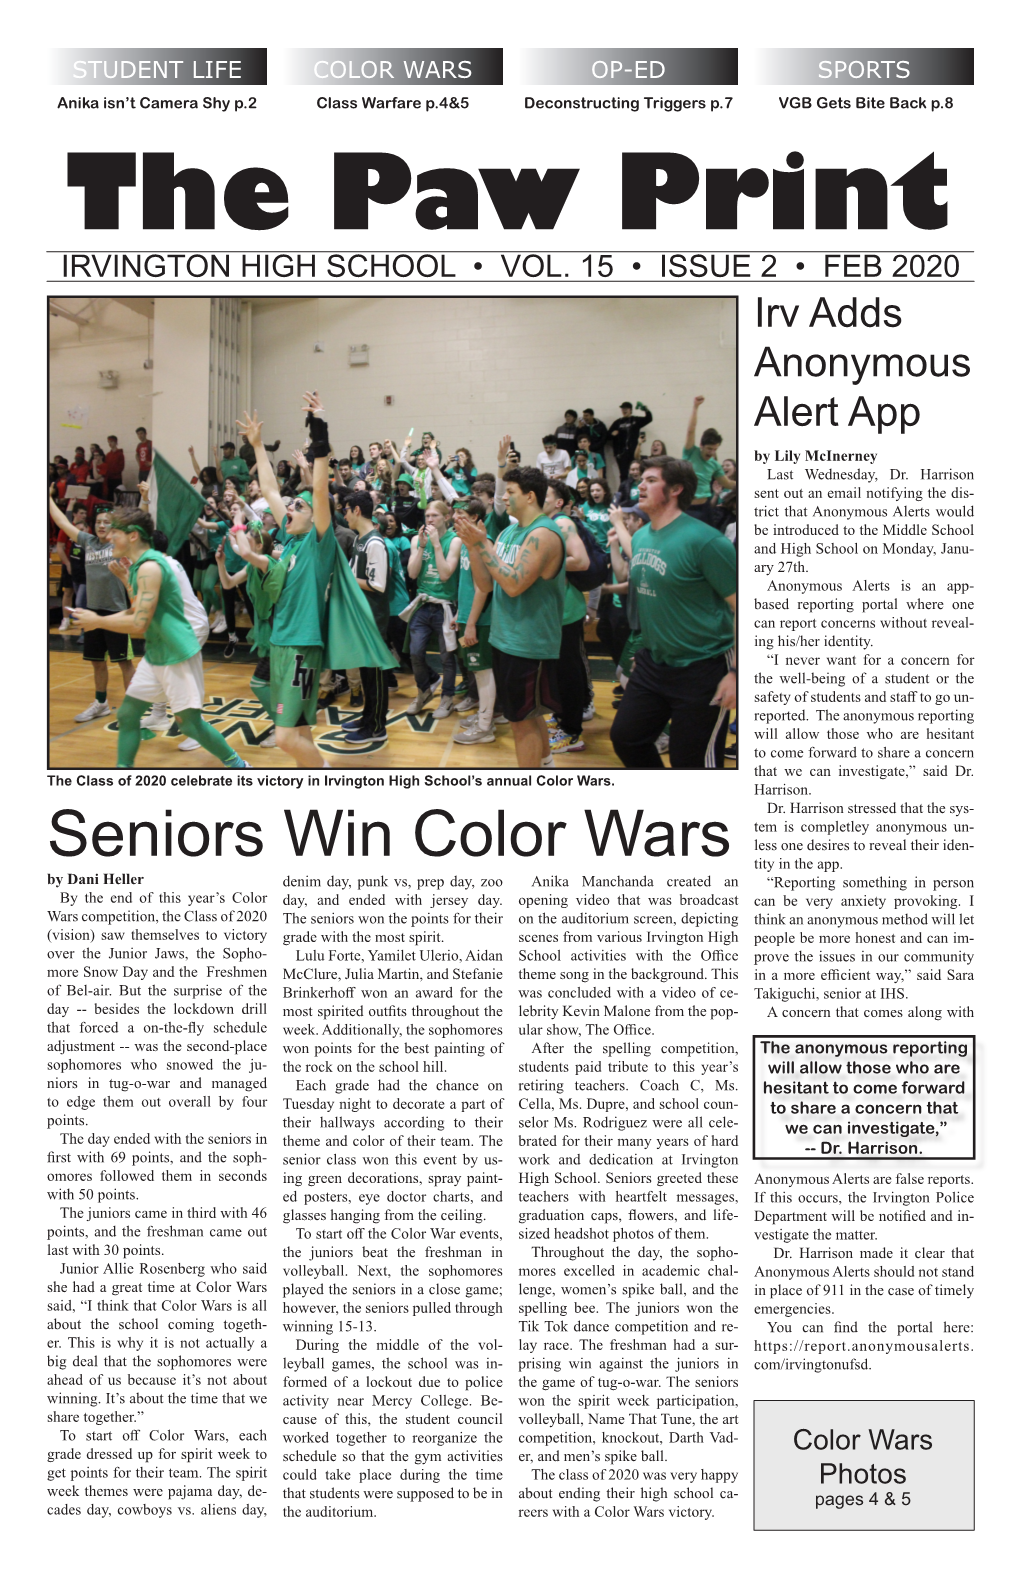 Seniors Win Color Wars Tity in the App